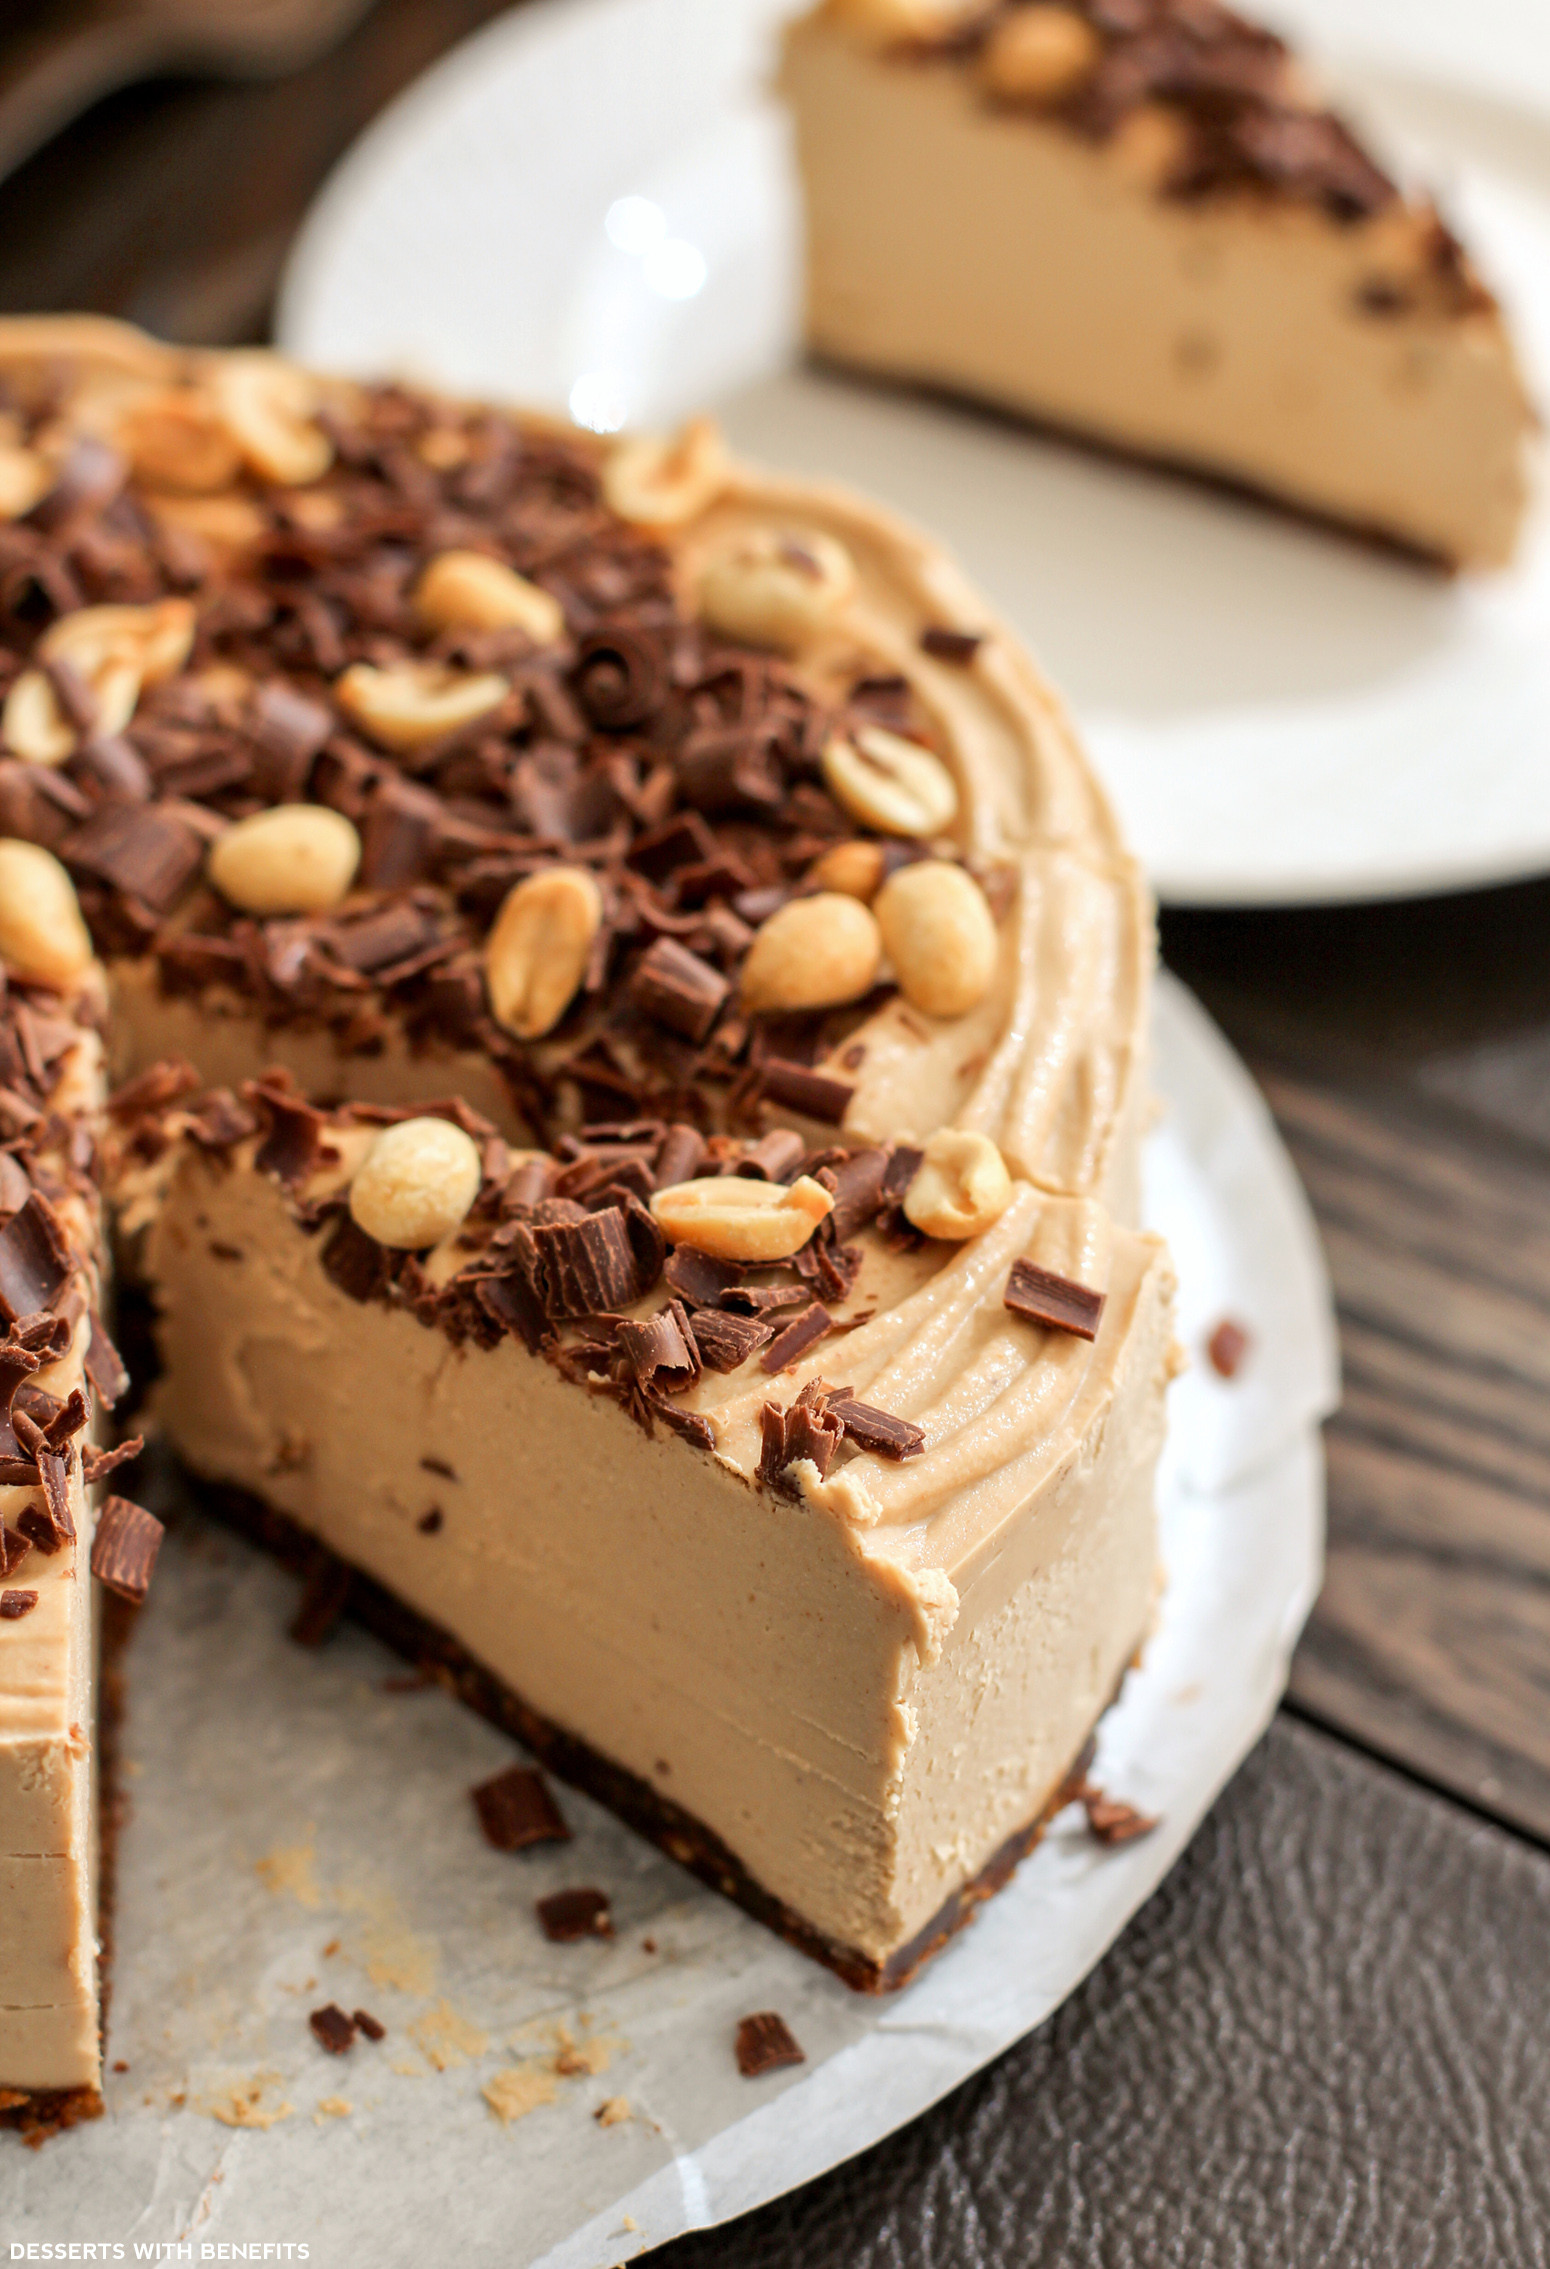 Peanut Butter Chocolate Desserts
 Healthy Chocolate Peanut Butter Raw Cheesecake